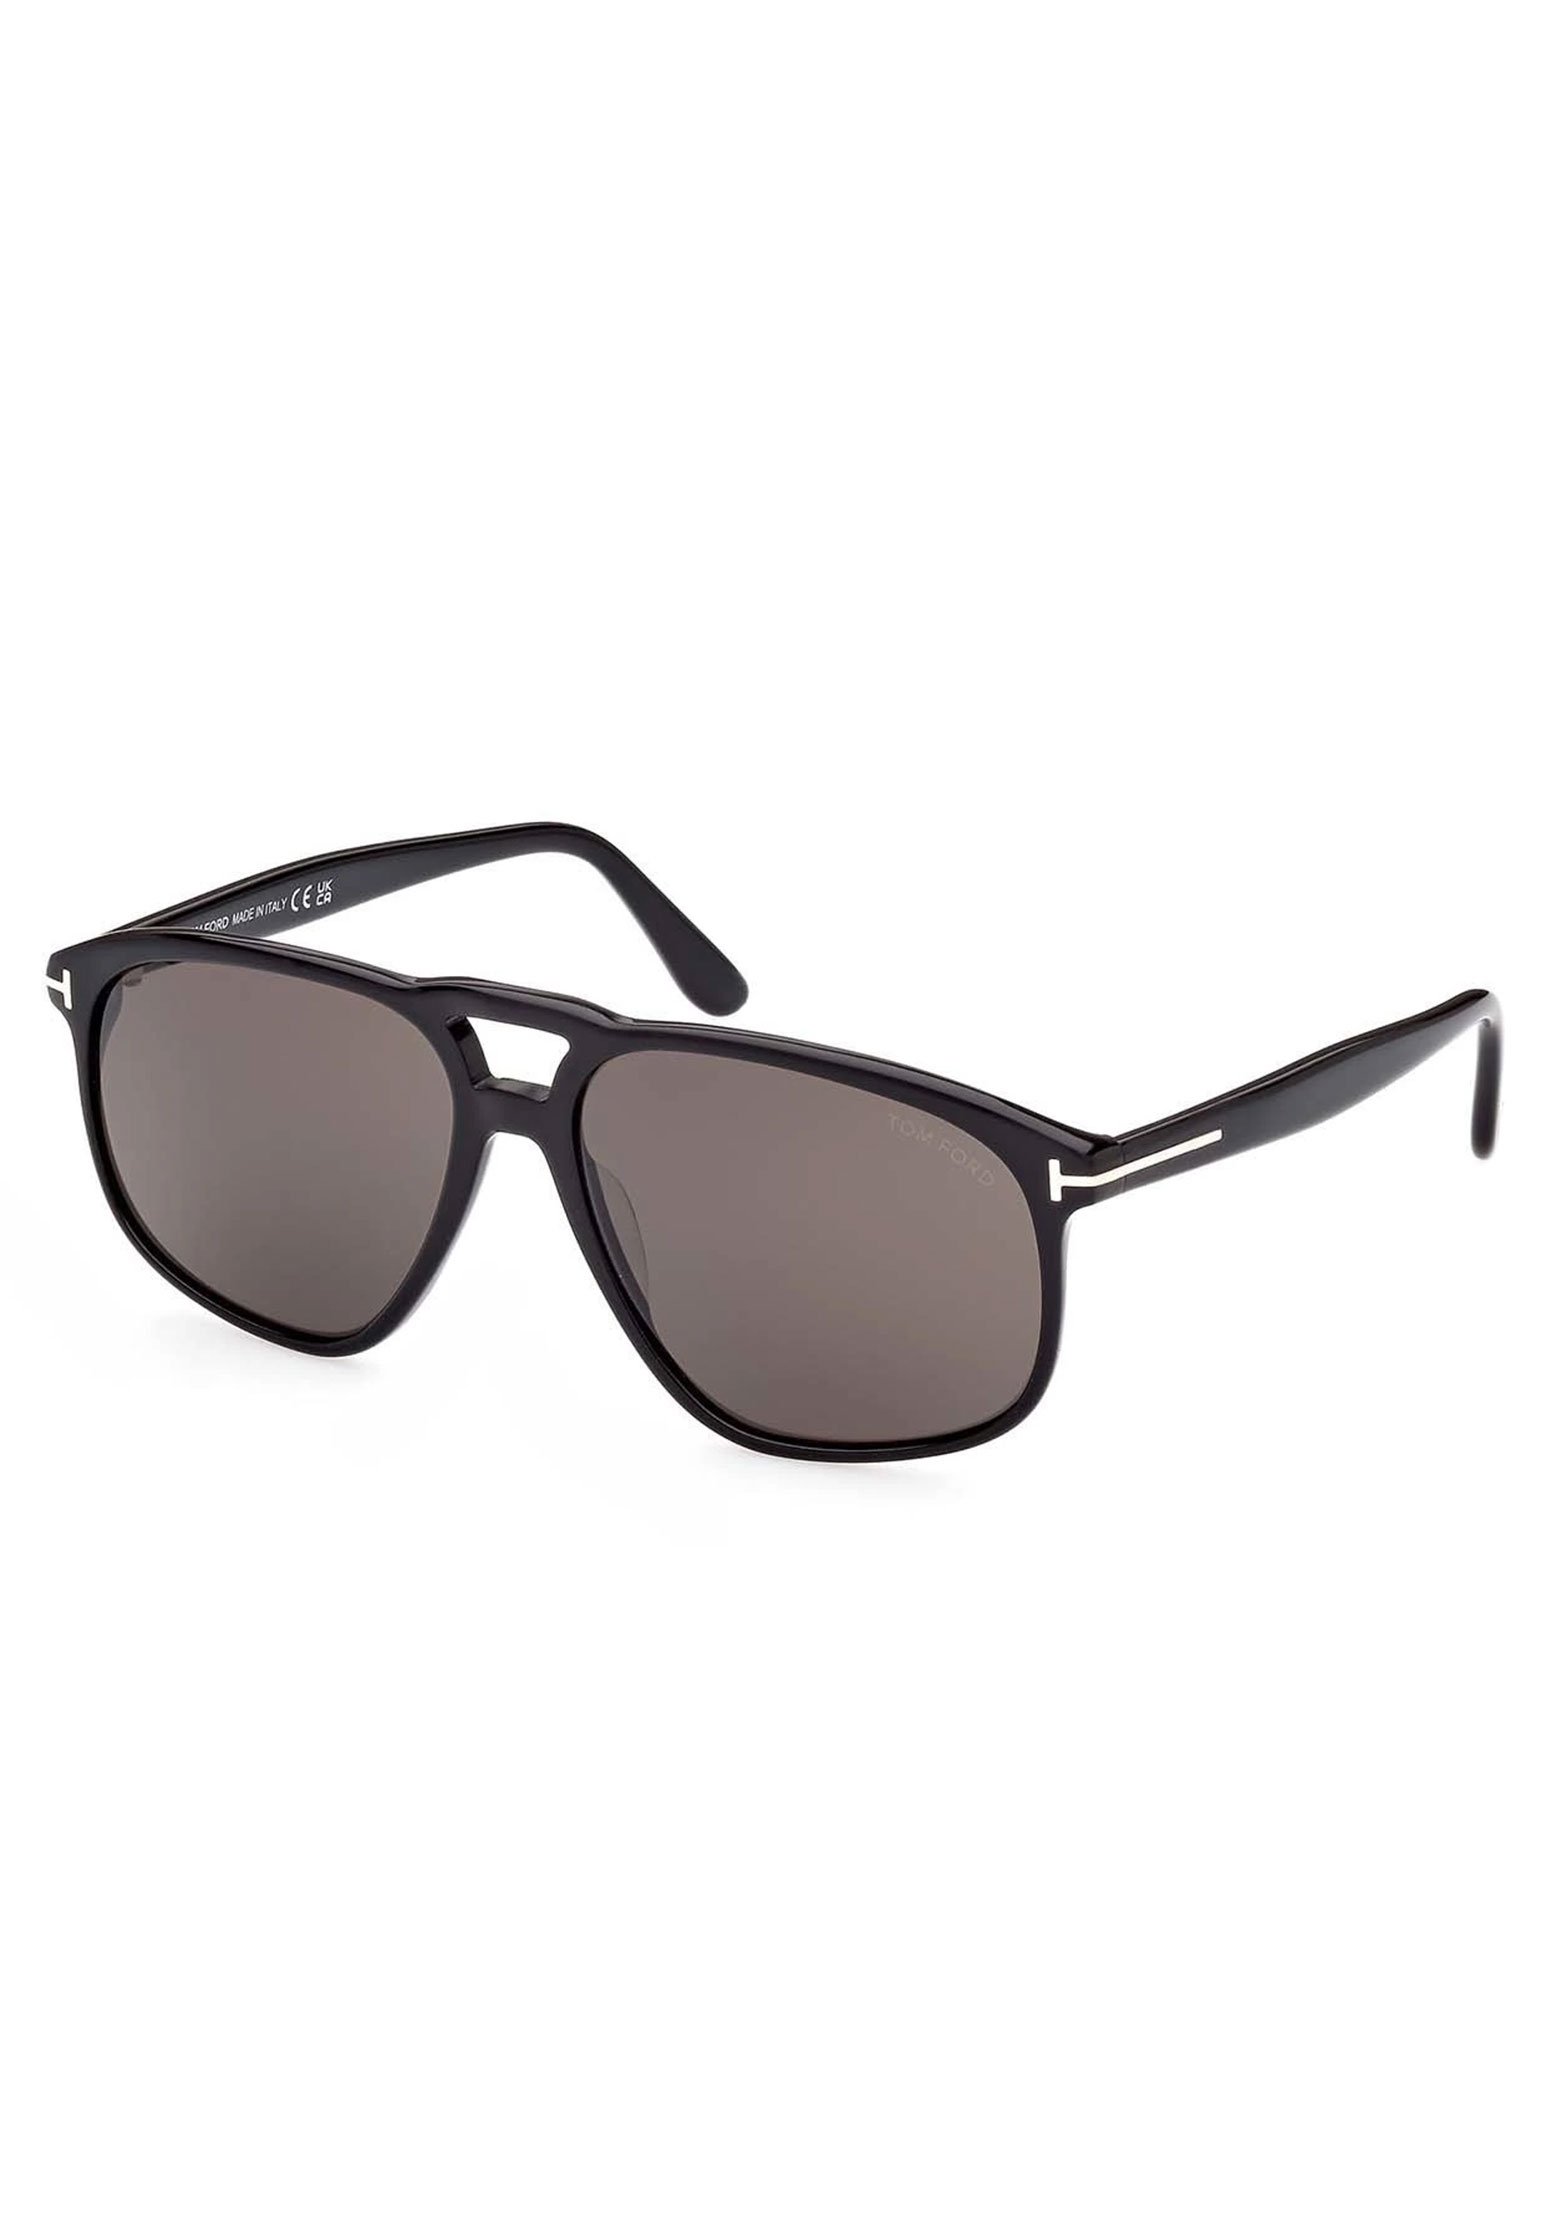 Sunglass TOM FORD Color: black (Code: 1663) in online store Allure